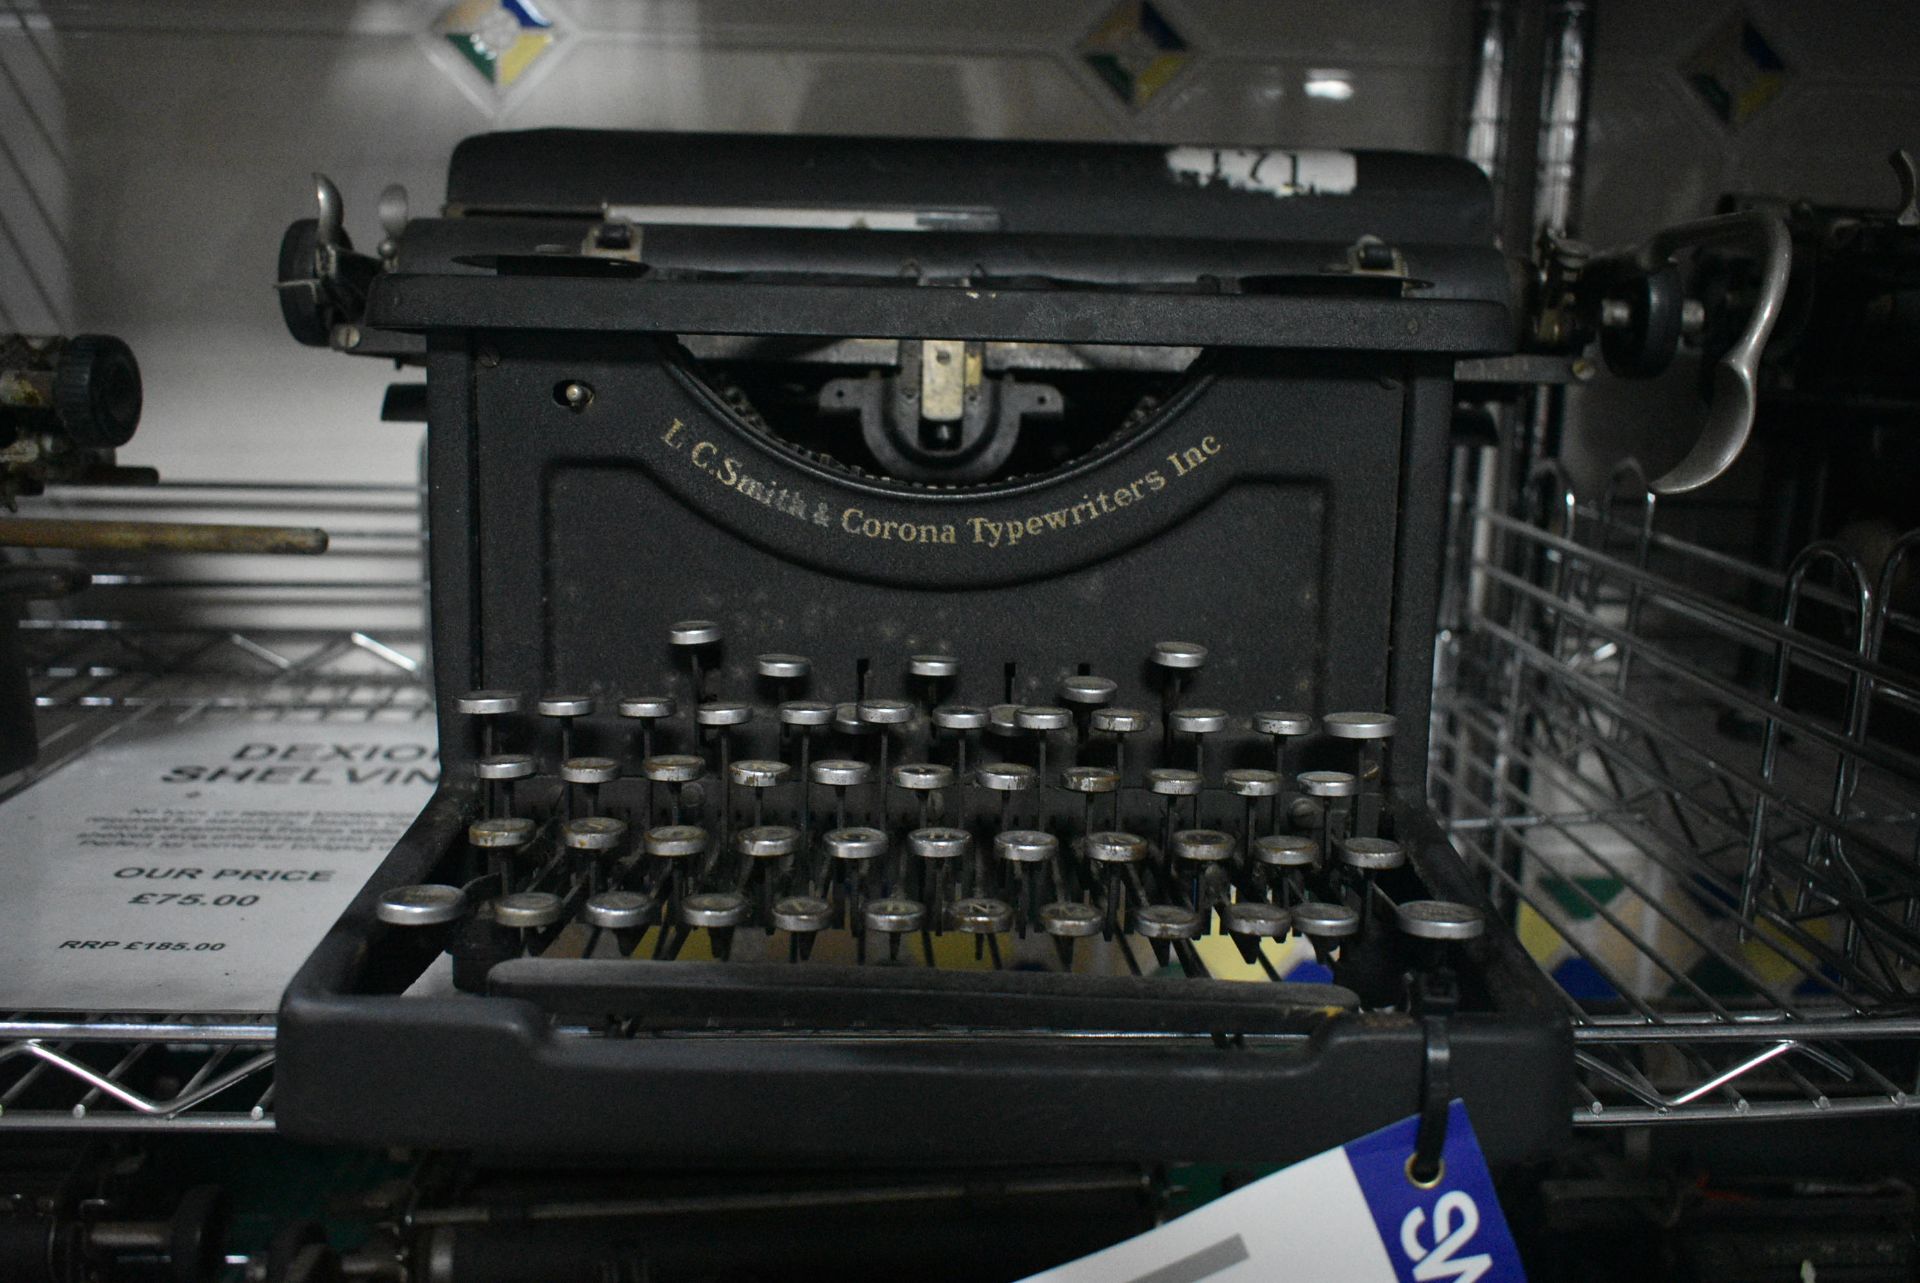 L C Smith & Corona Typewriter (note this lot is no - Image 4 of 5